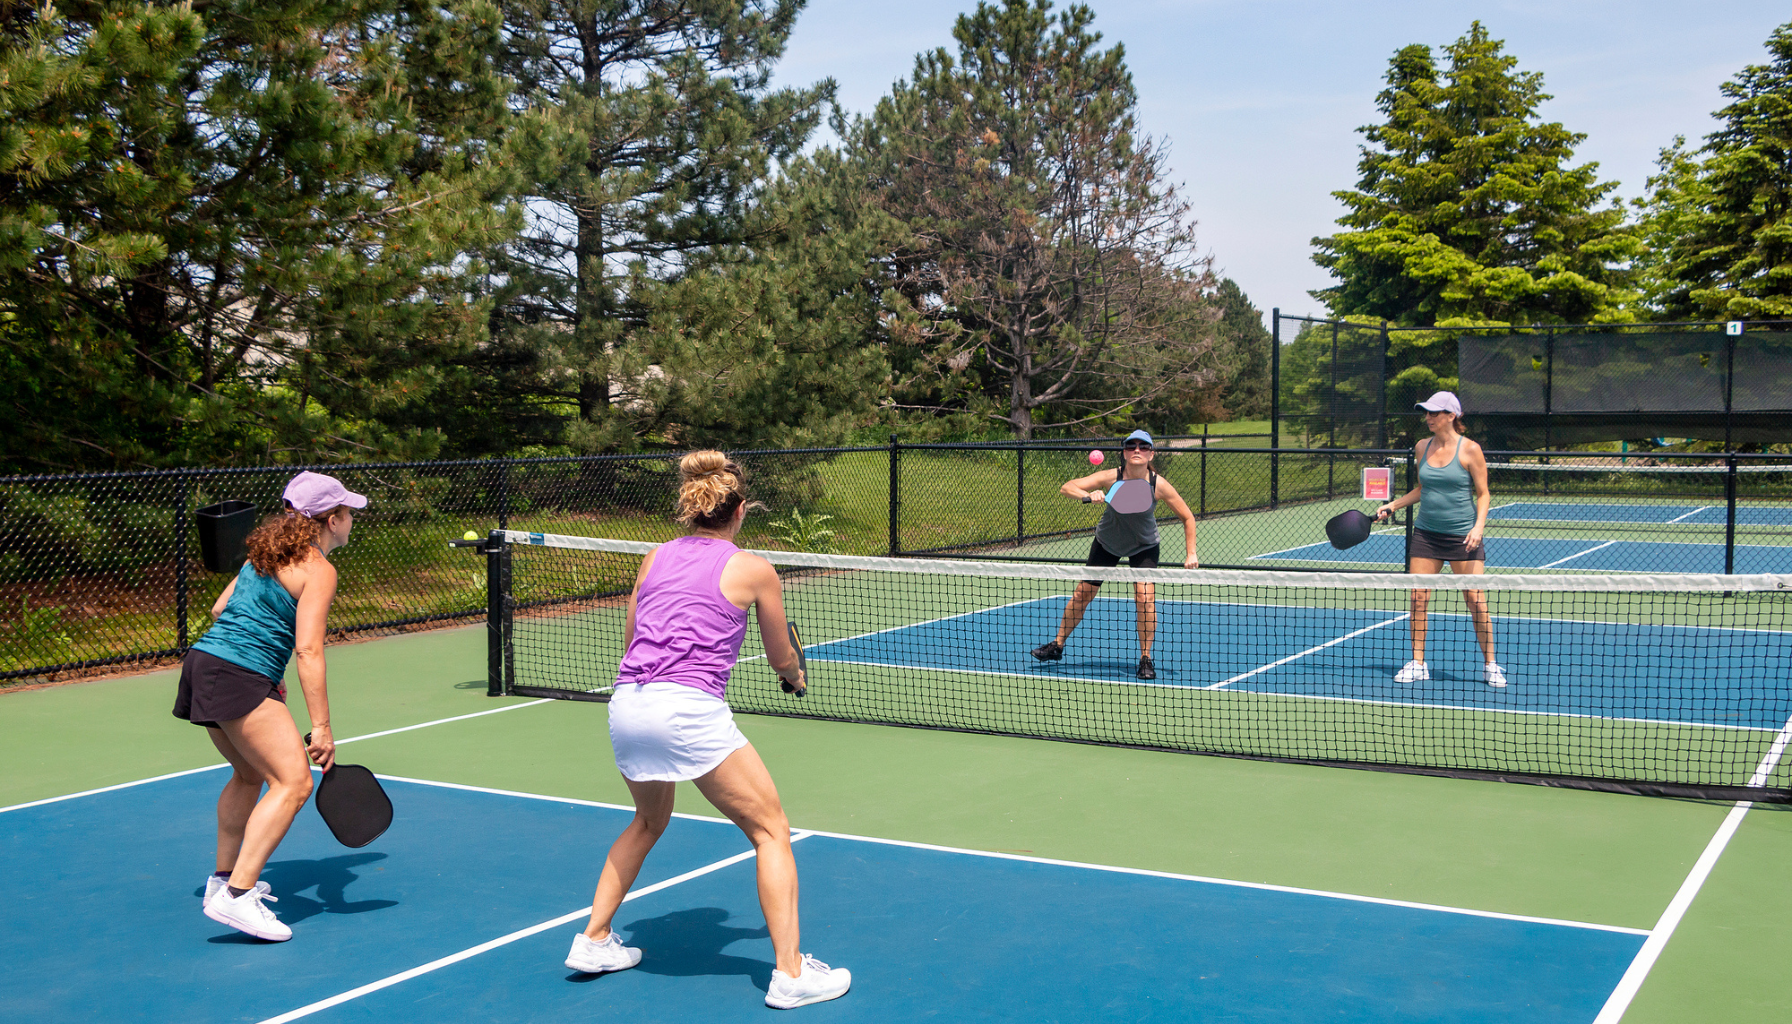 Pickleball doubles players in action on the court, demonstrating teamwork and dynamic play.